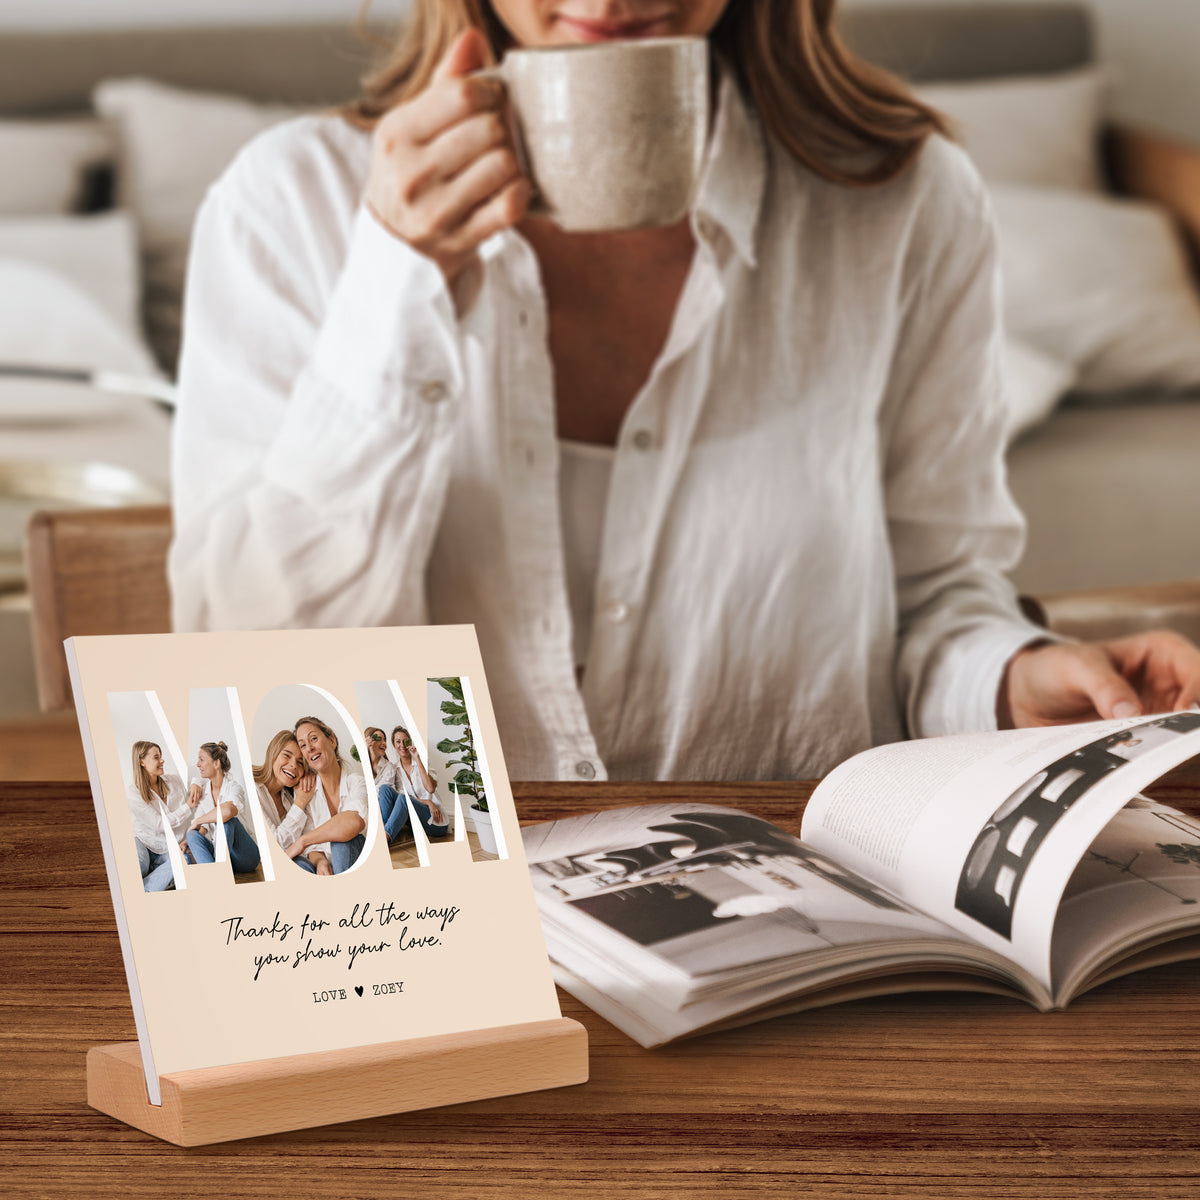 Personalized Photo Gifts for Mom Most Thoughtful Gifts with Custom Message